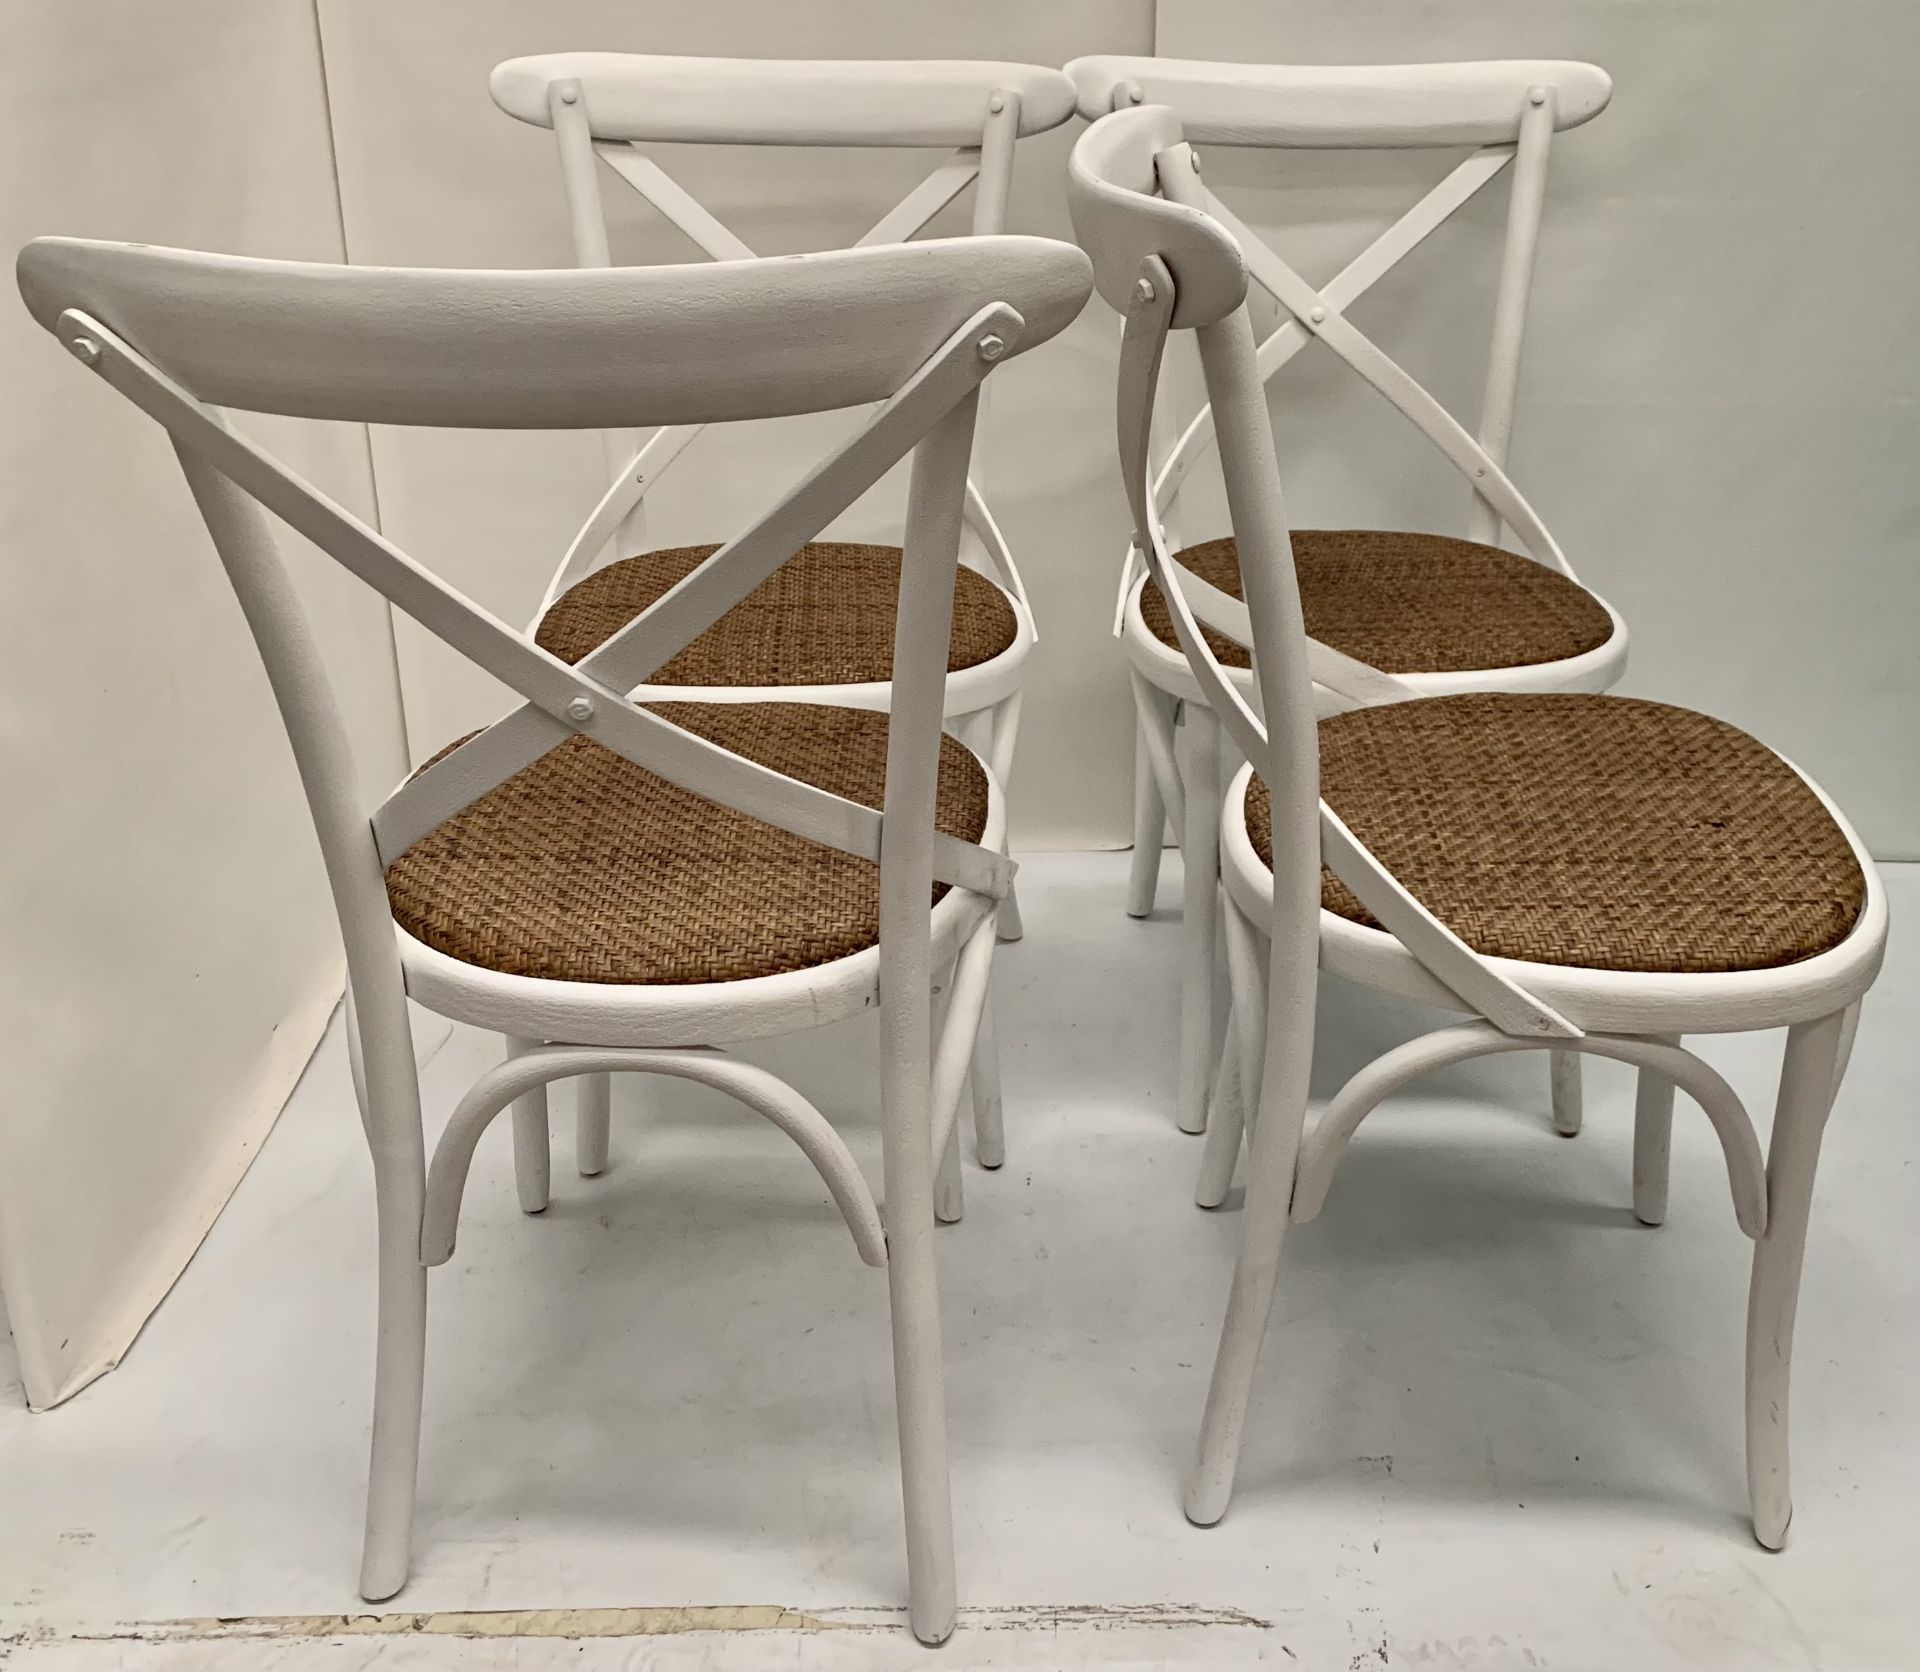 4 x Palm white wooden dining chairs with hessian seats, - Image 2 of 2